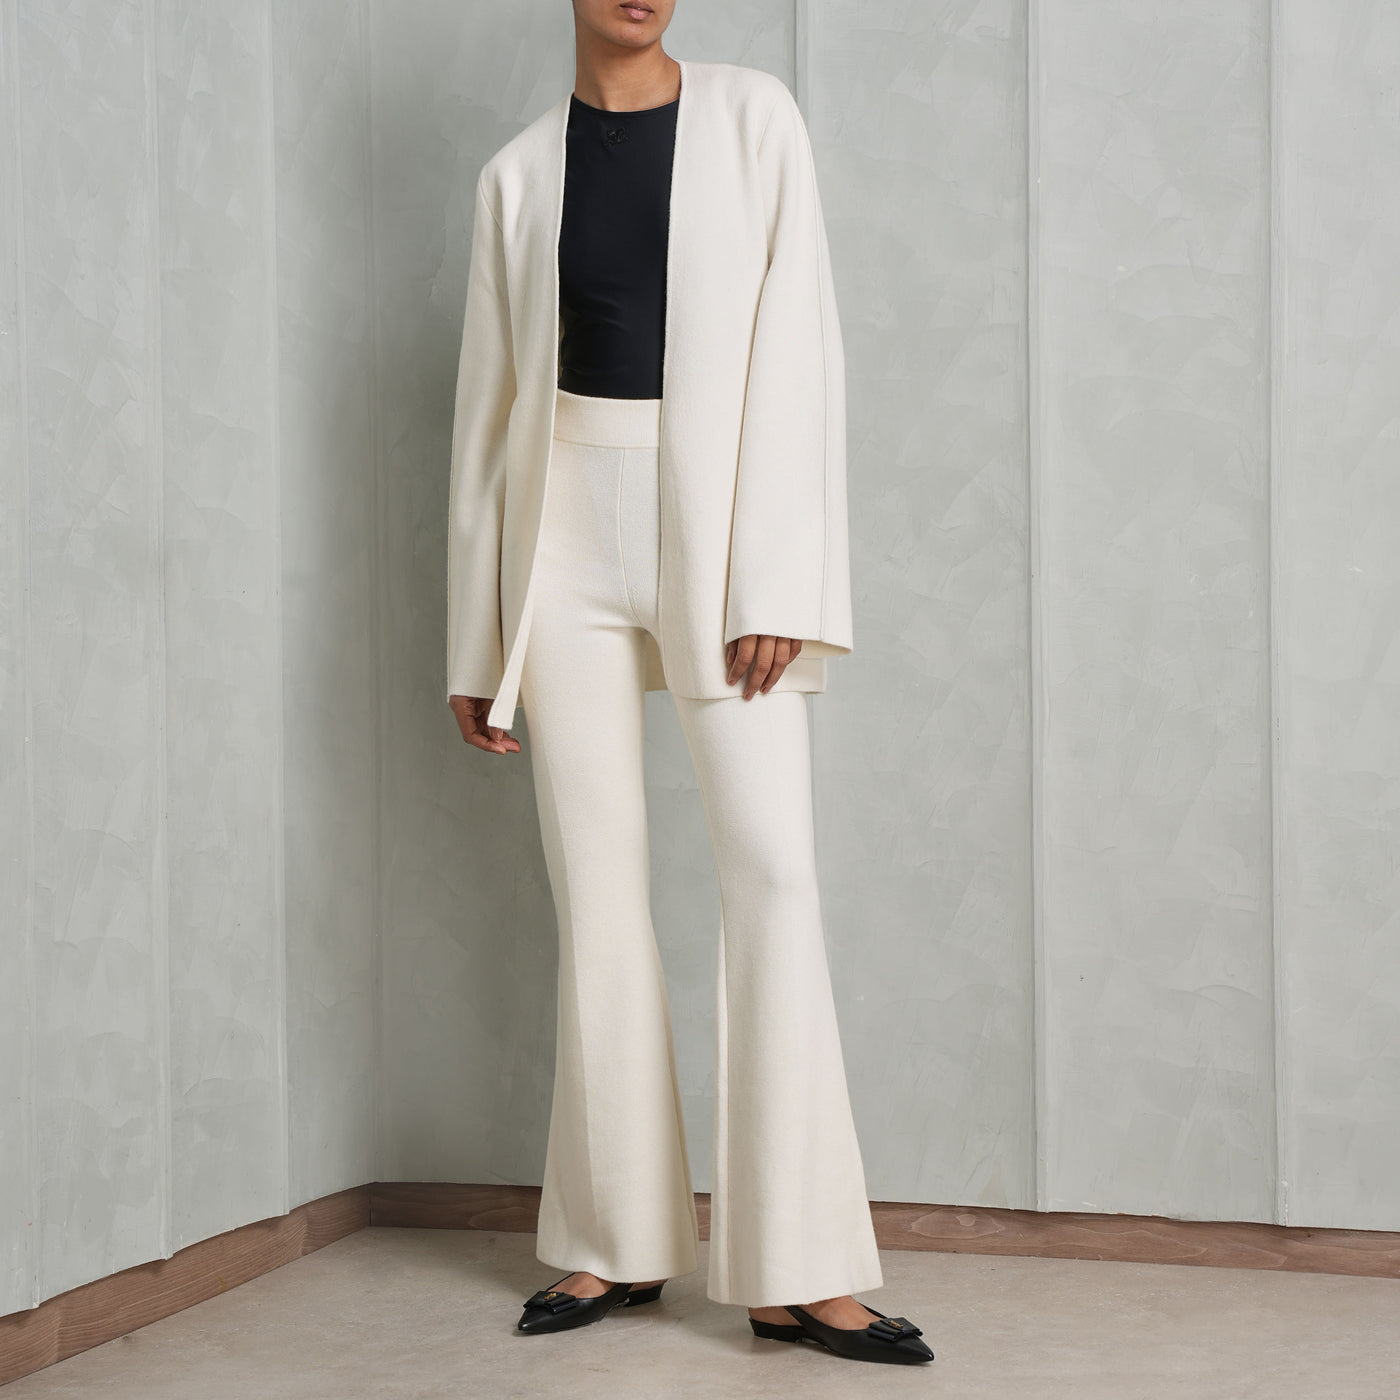 GALVAN LONDON Maia cashmere white flared pants with maia jacket